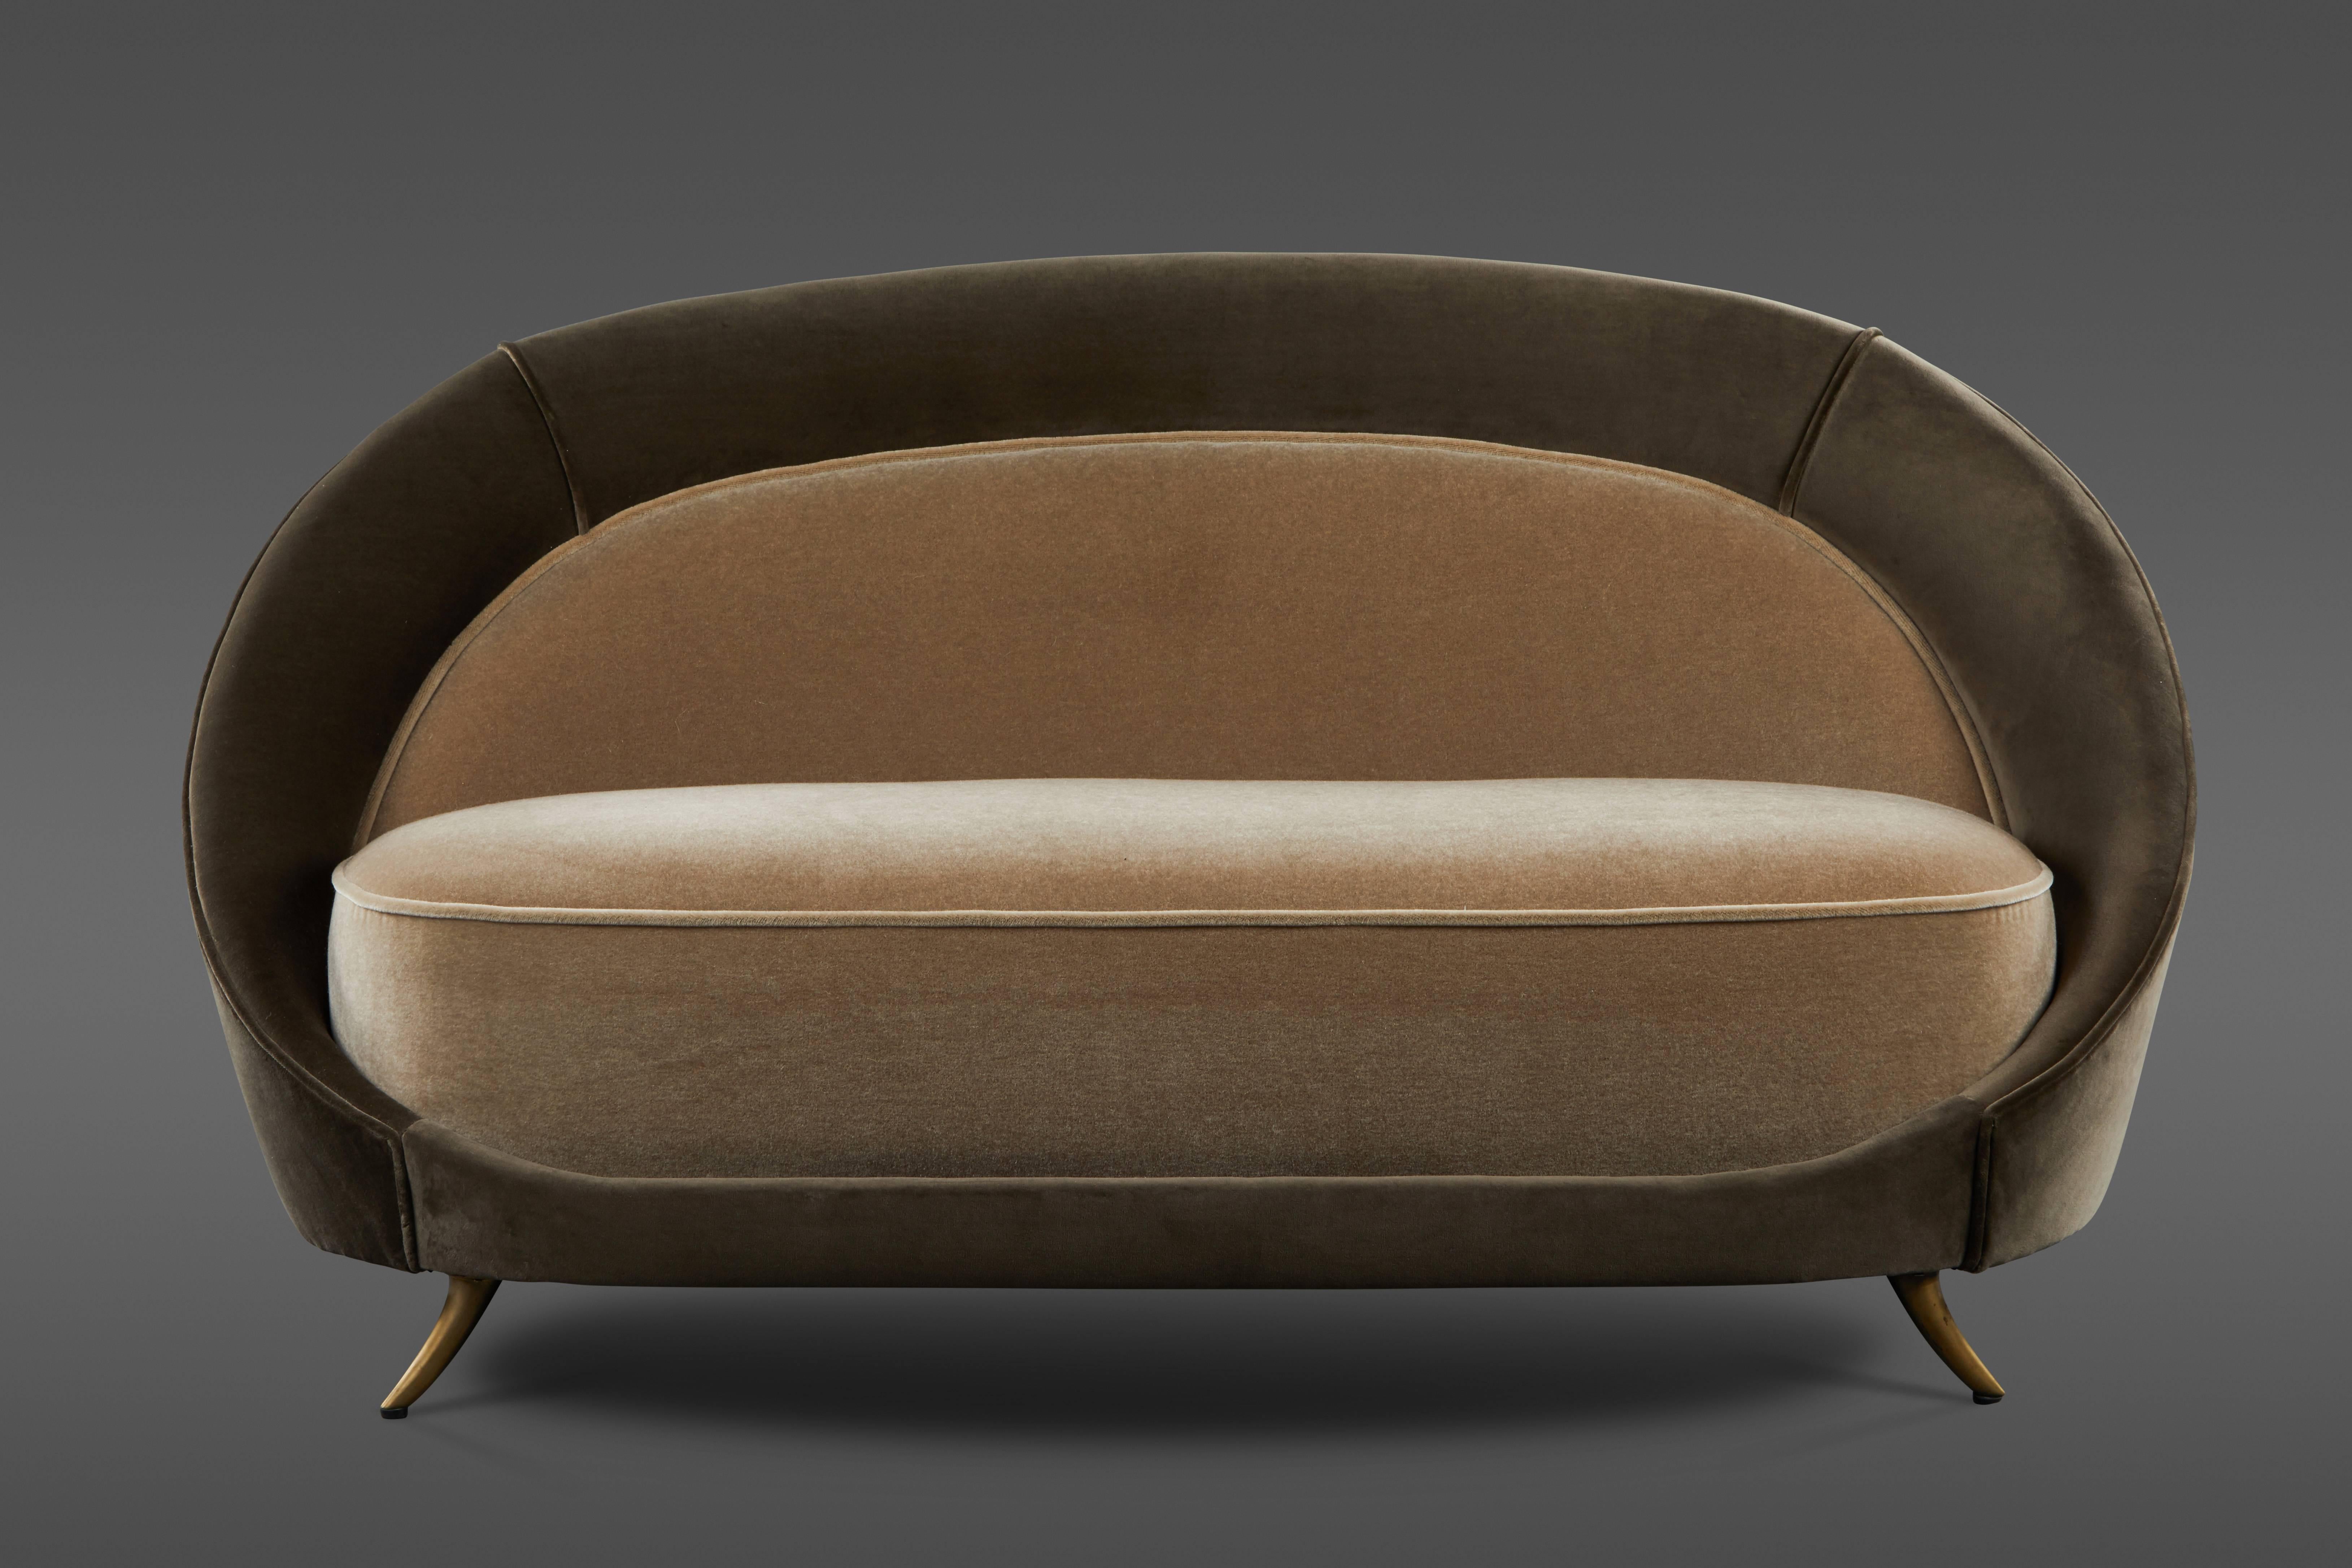 A charming two-tone settee by Silvio Cavatorta for Production ISA, oval in shape with curved brass legs. Custom upholstered in a Holly Hunt velvet with a Rogers and Goffigon mohair seat and back.